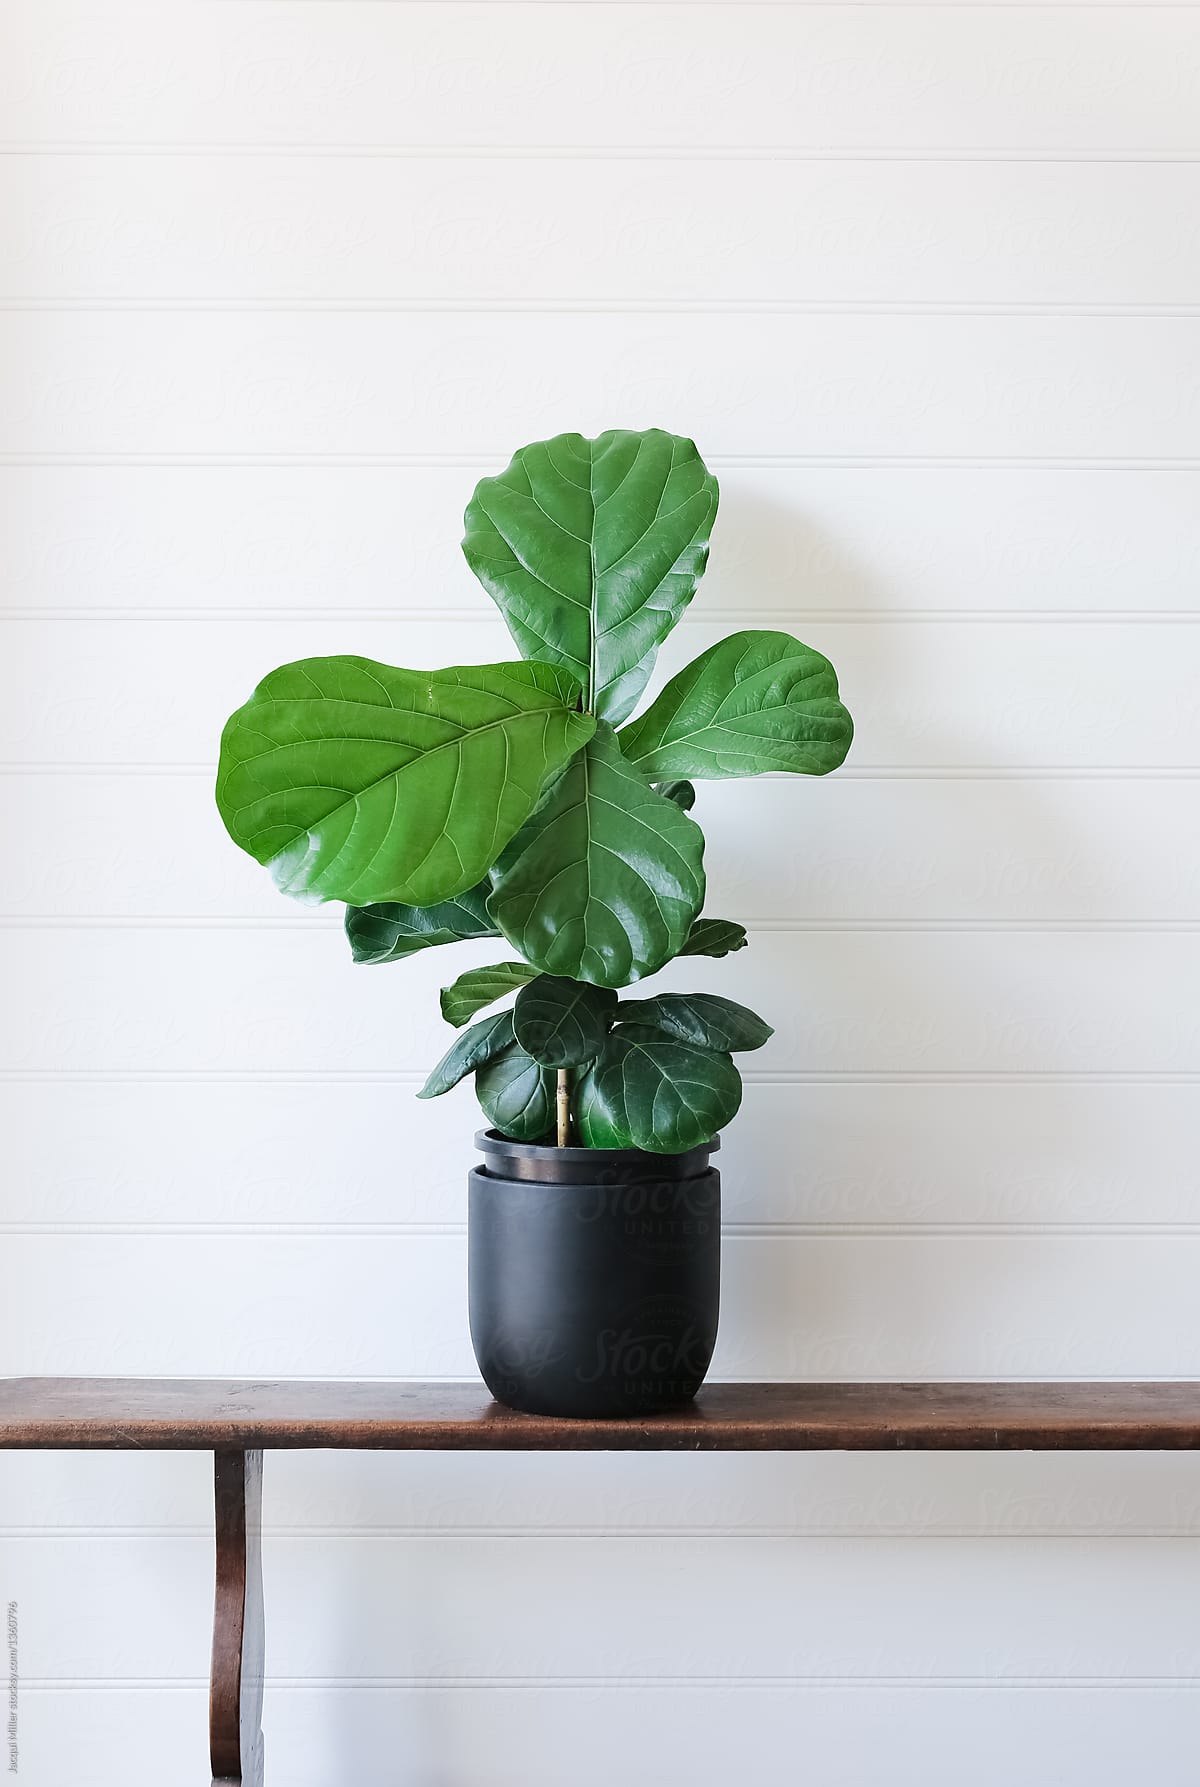 Young Fiddle Leaf Fig (Ficus lyrata) against white background